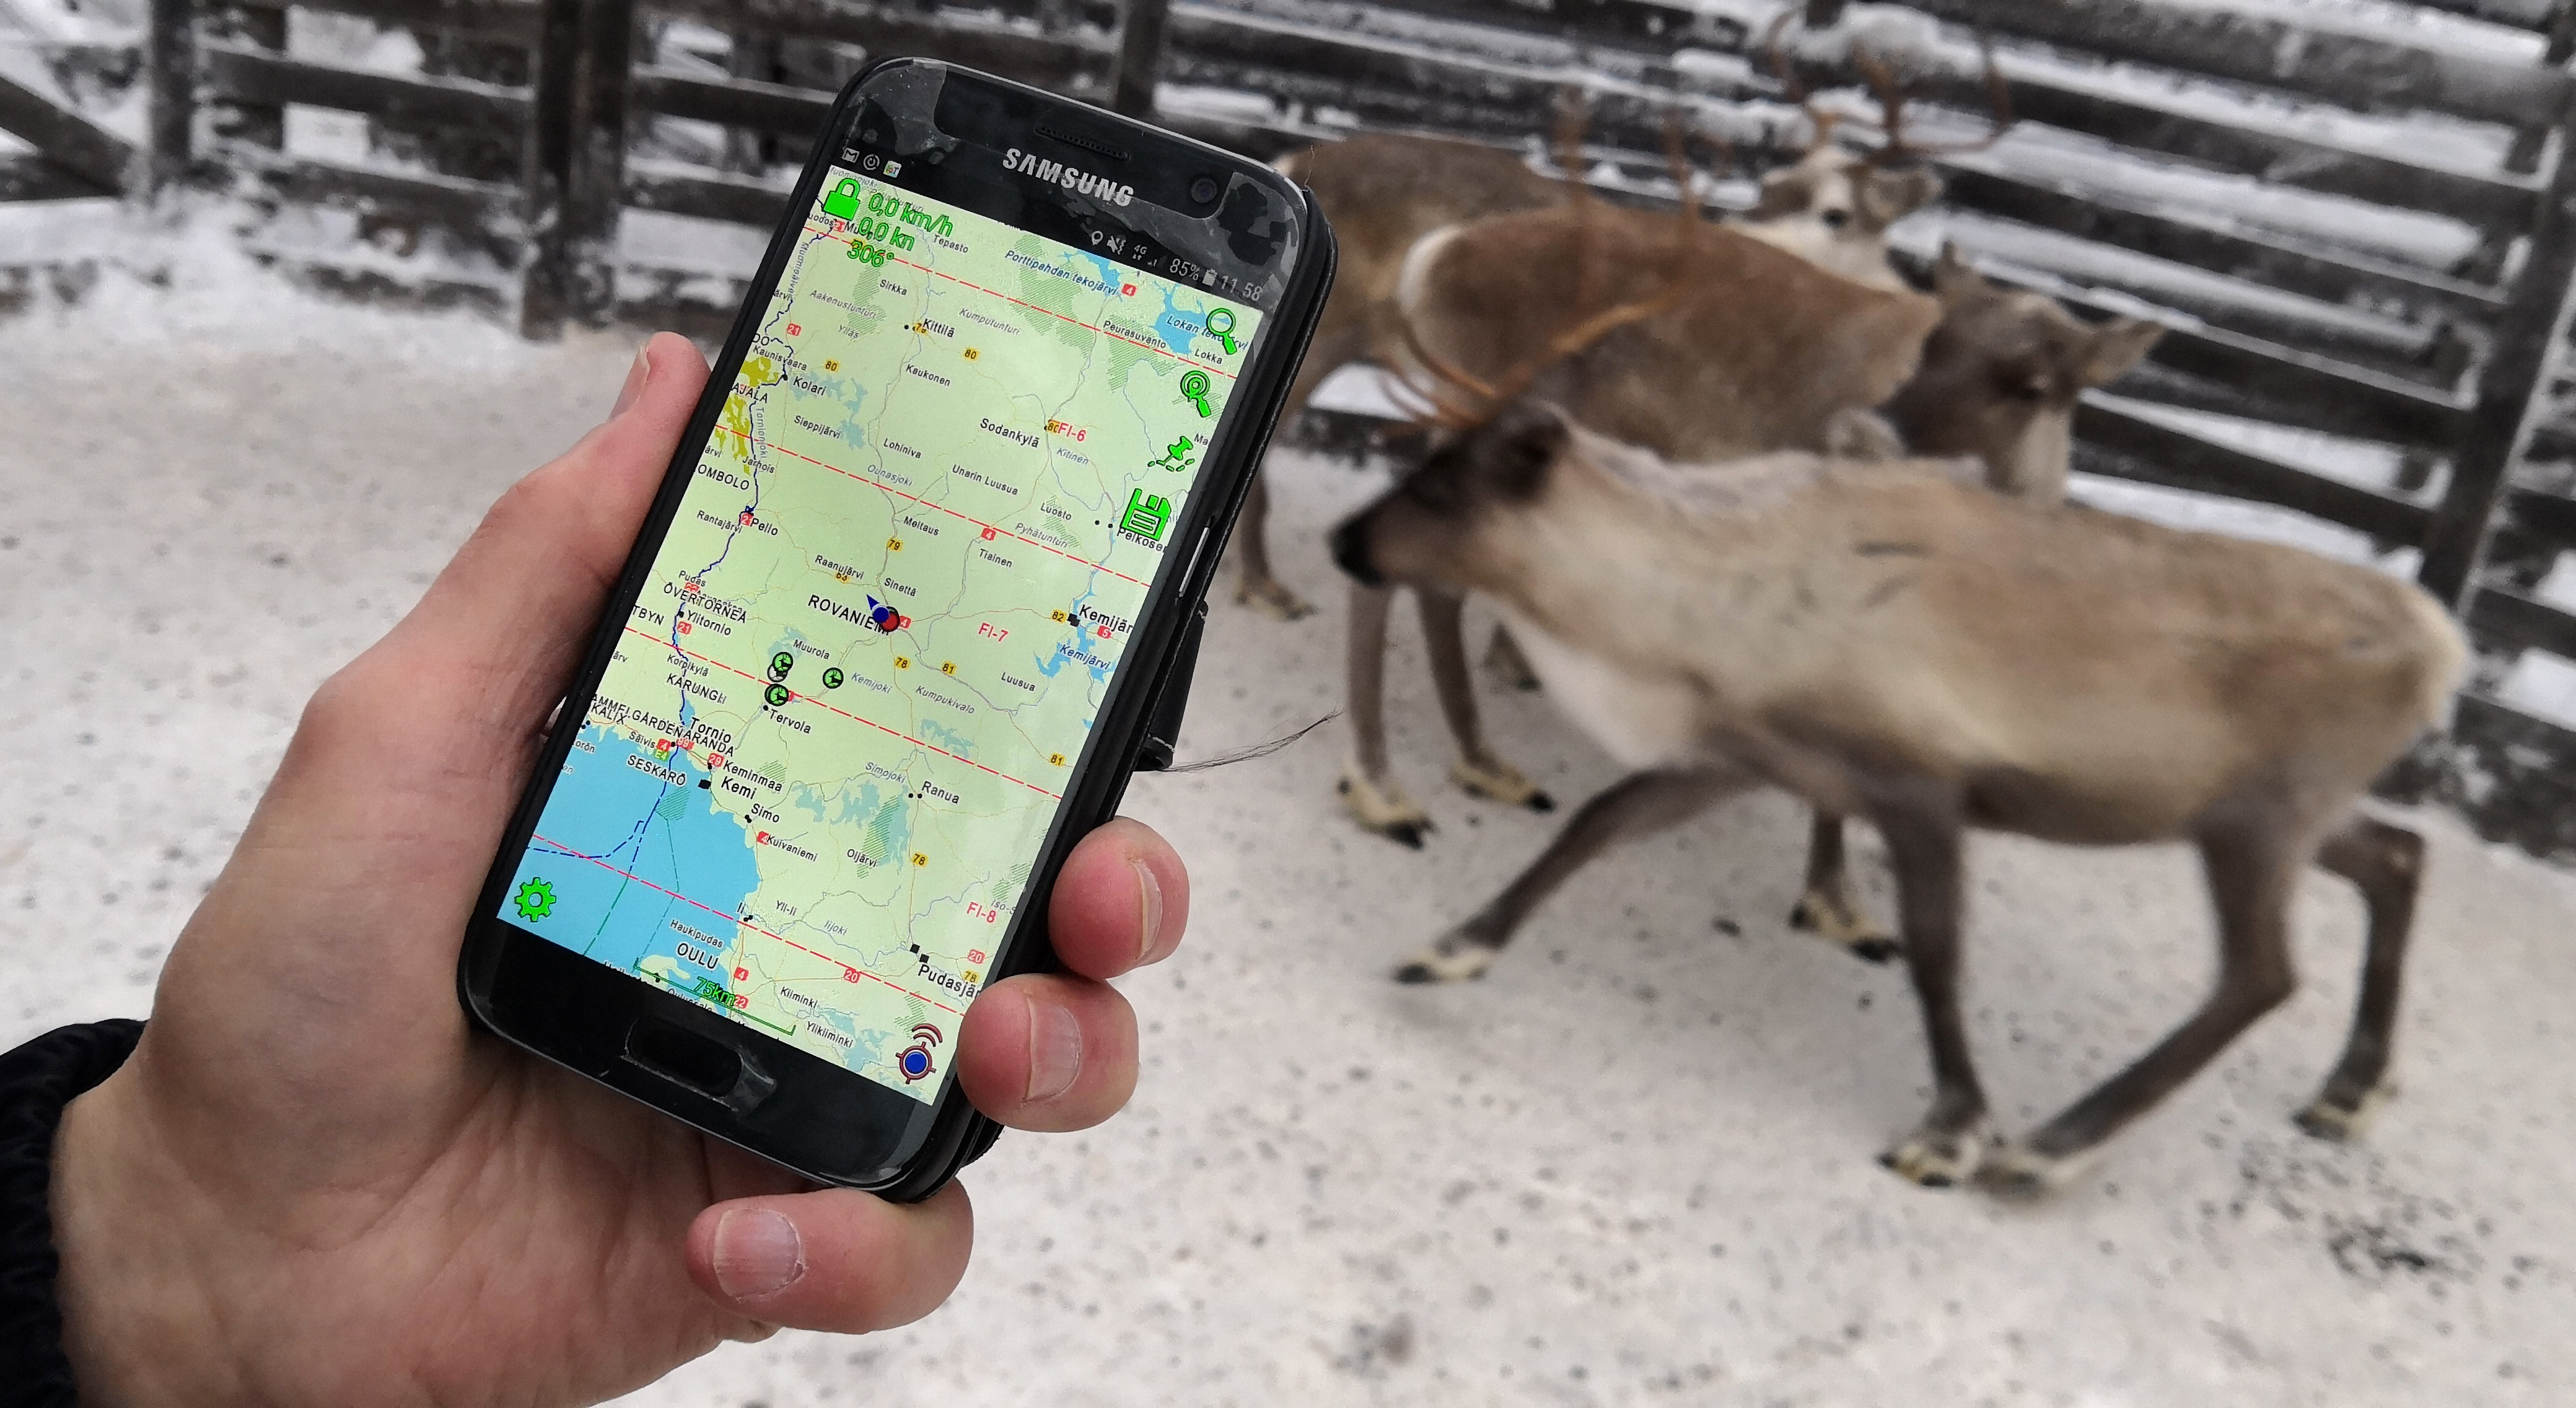 jammer legal forms arizona , Then One Foggy Christmas Eve, Reindeers Got Connected